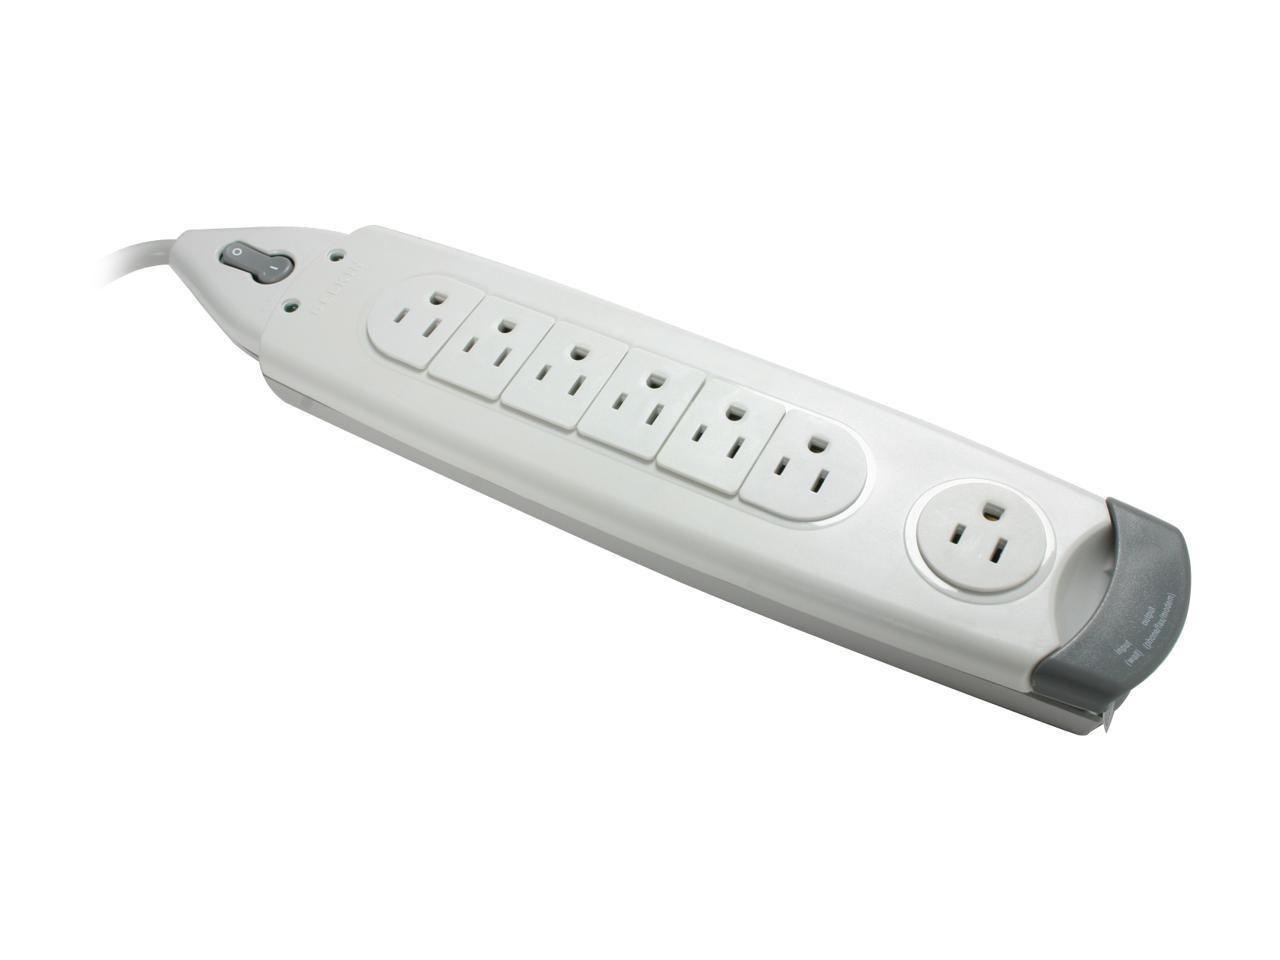 F9H710-06 1045 Joules Belkin 7-Outlet SurgeMaster Home Series Power Strip Surge Protector with 6-Foot Power Cord 